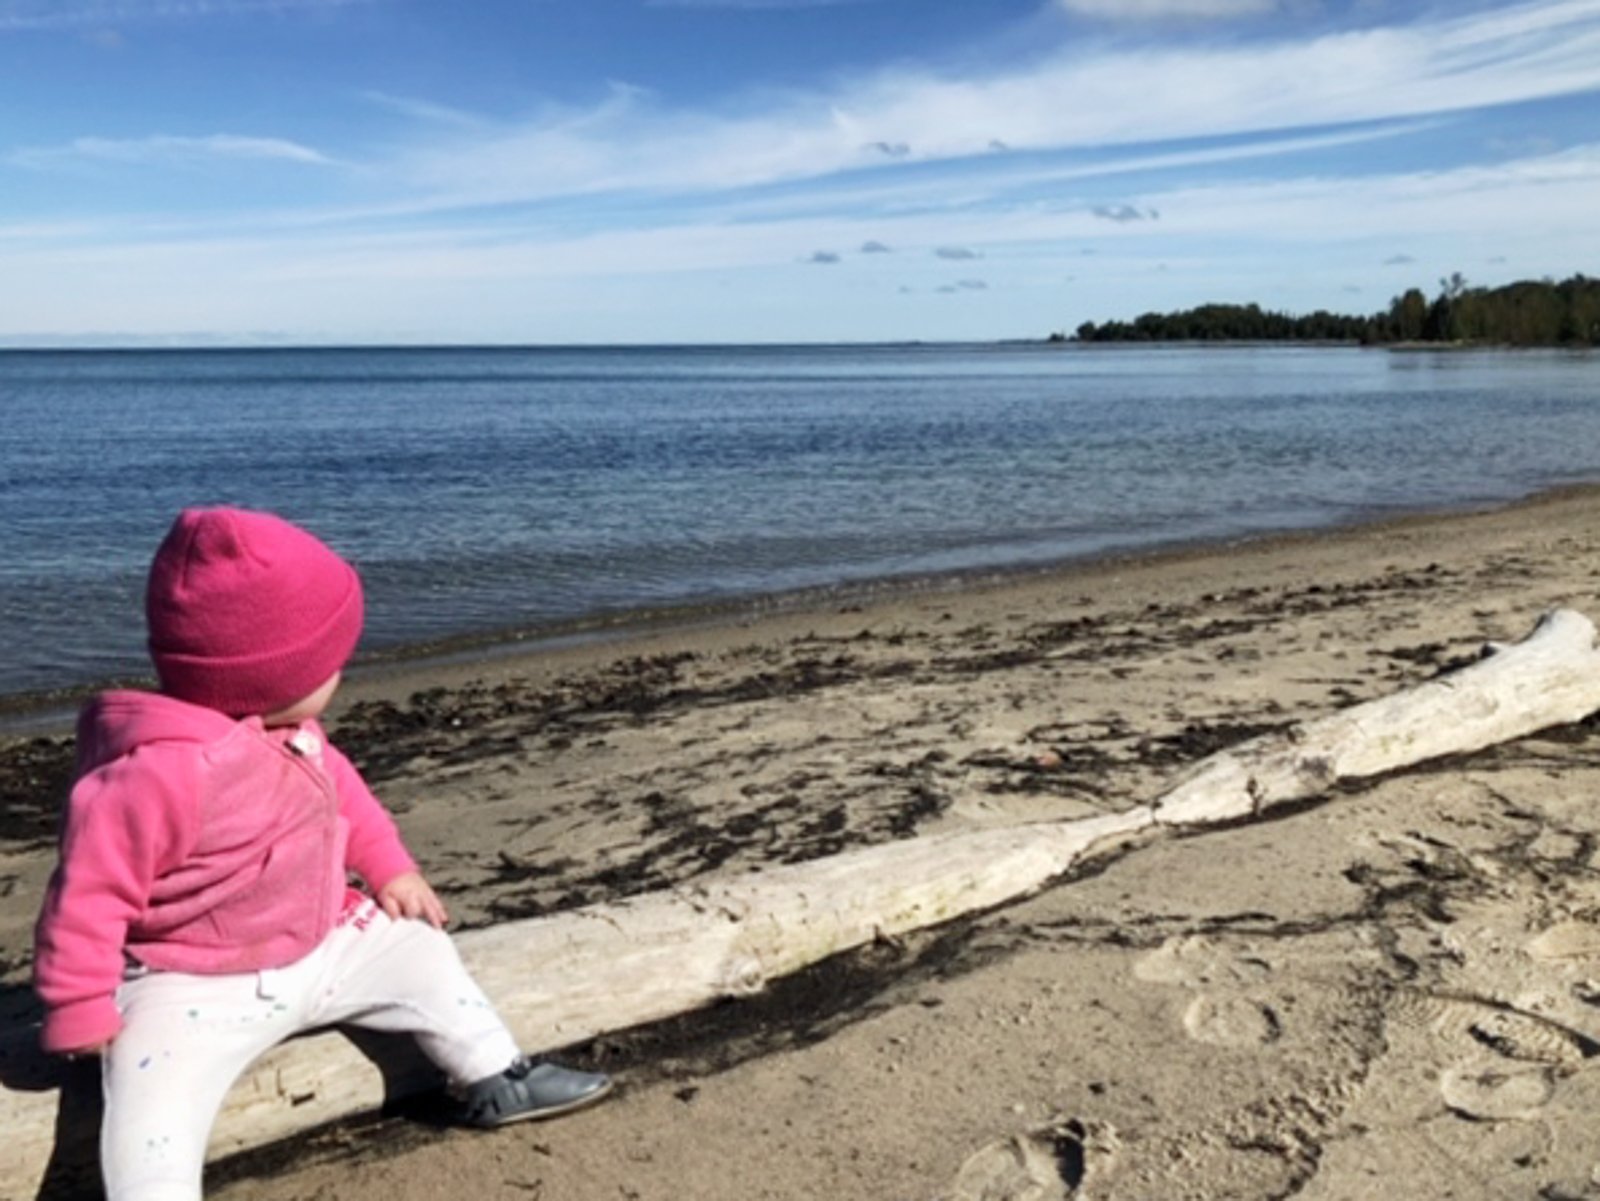 Eleanor taking in the view at MacGregor Point Provincial Park, October 2019